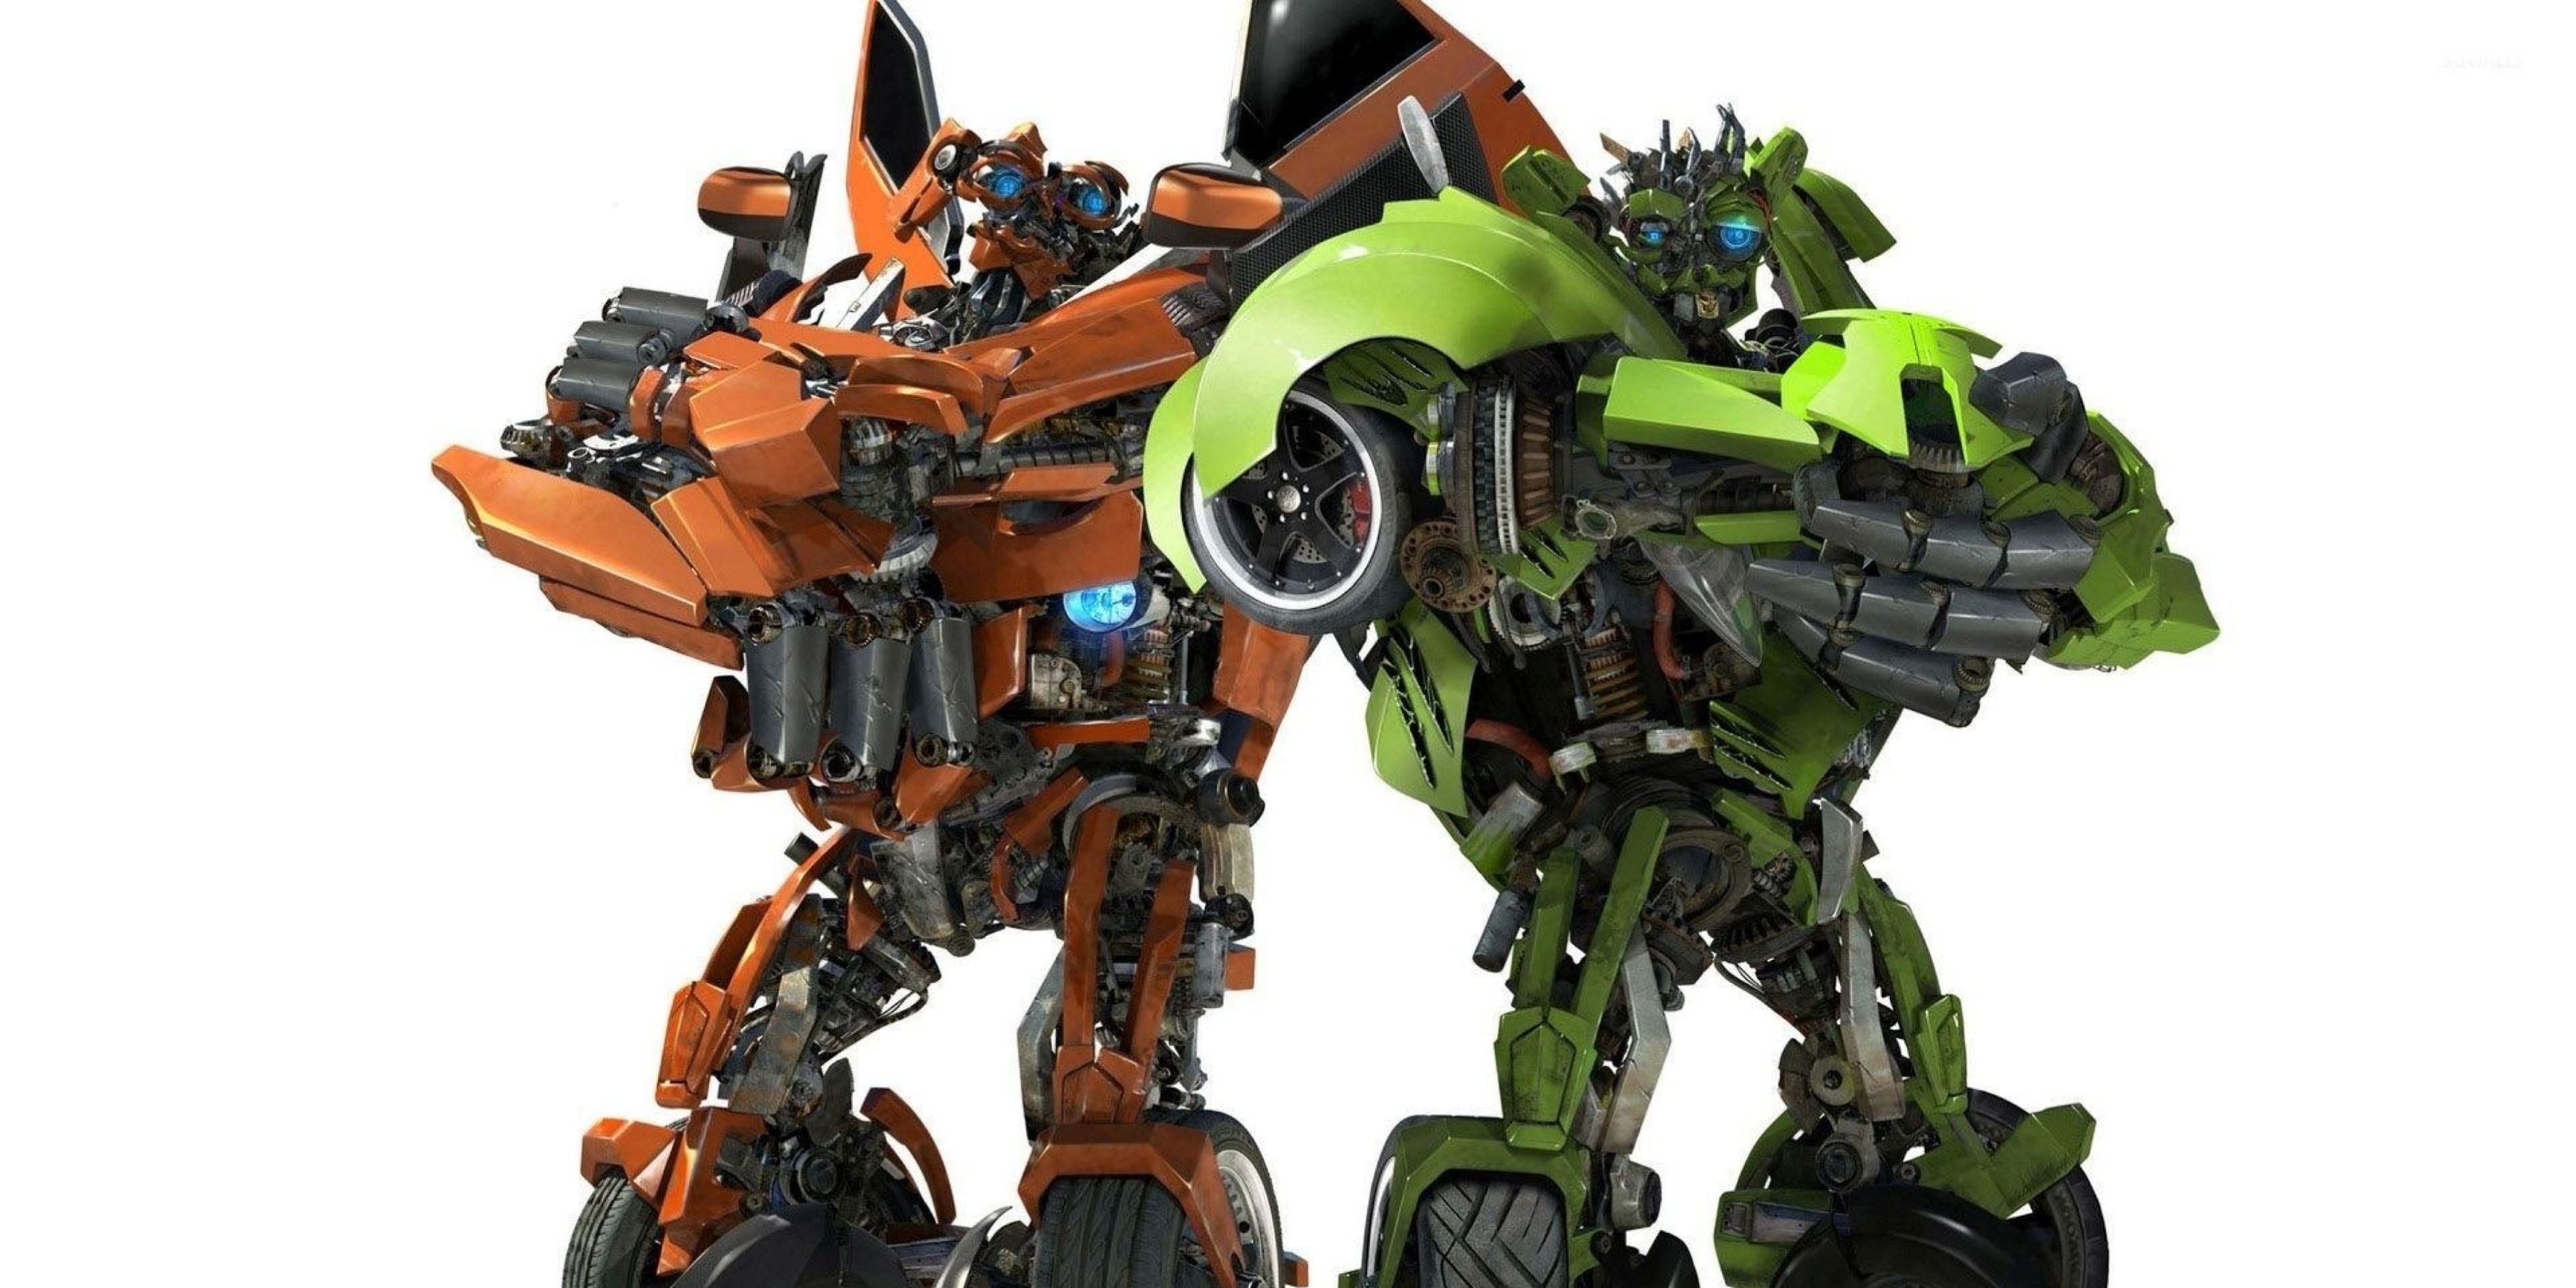 Characters Skids and Mudflap from Transformers 2